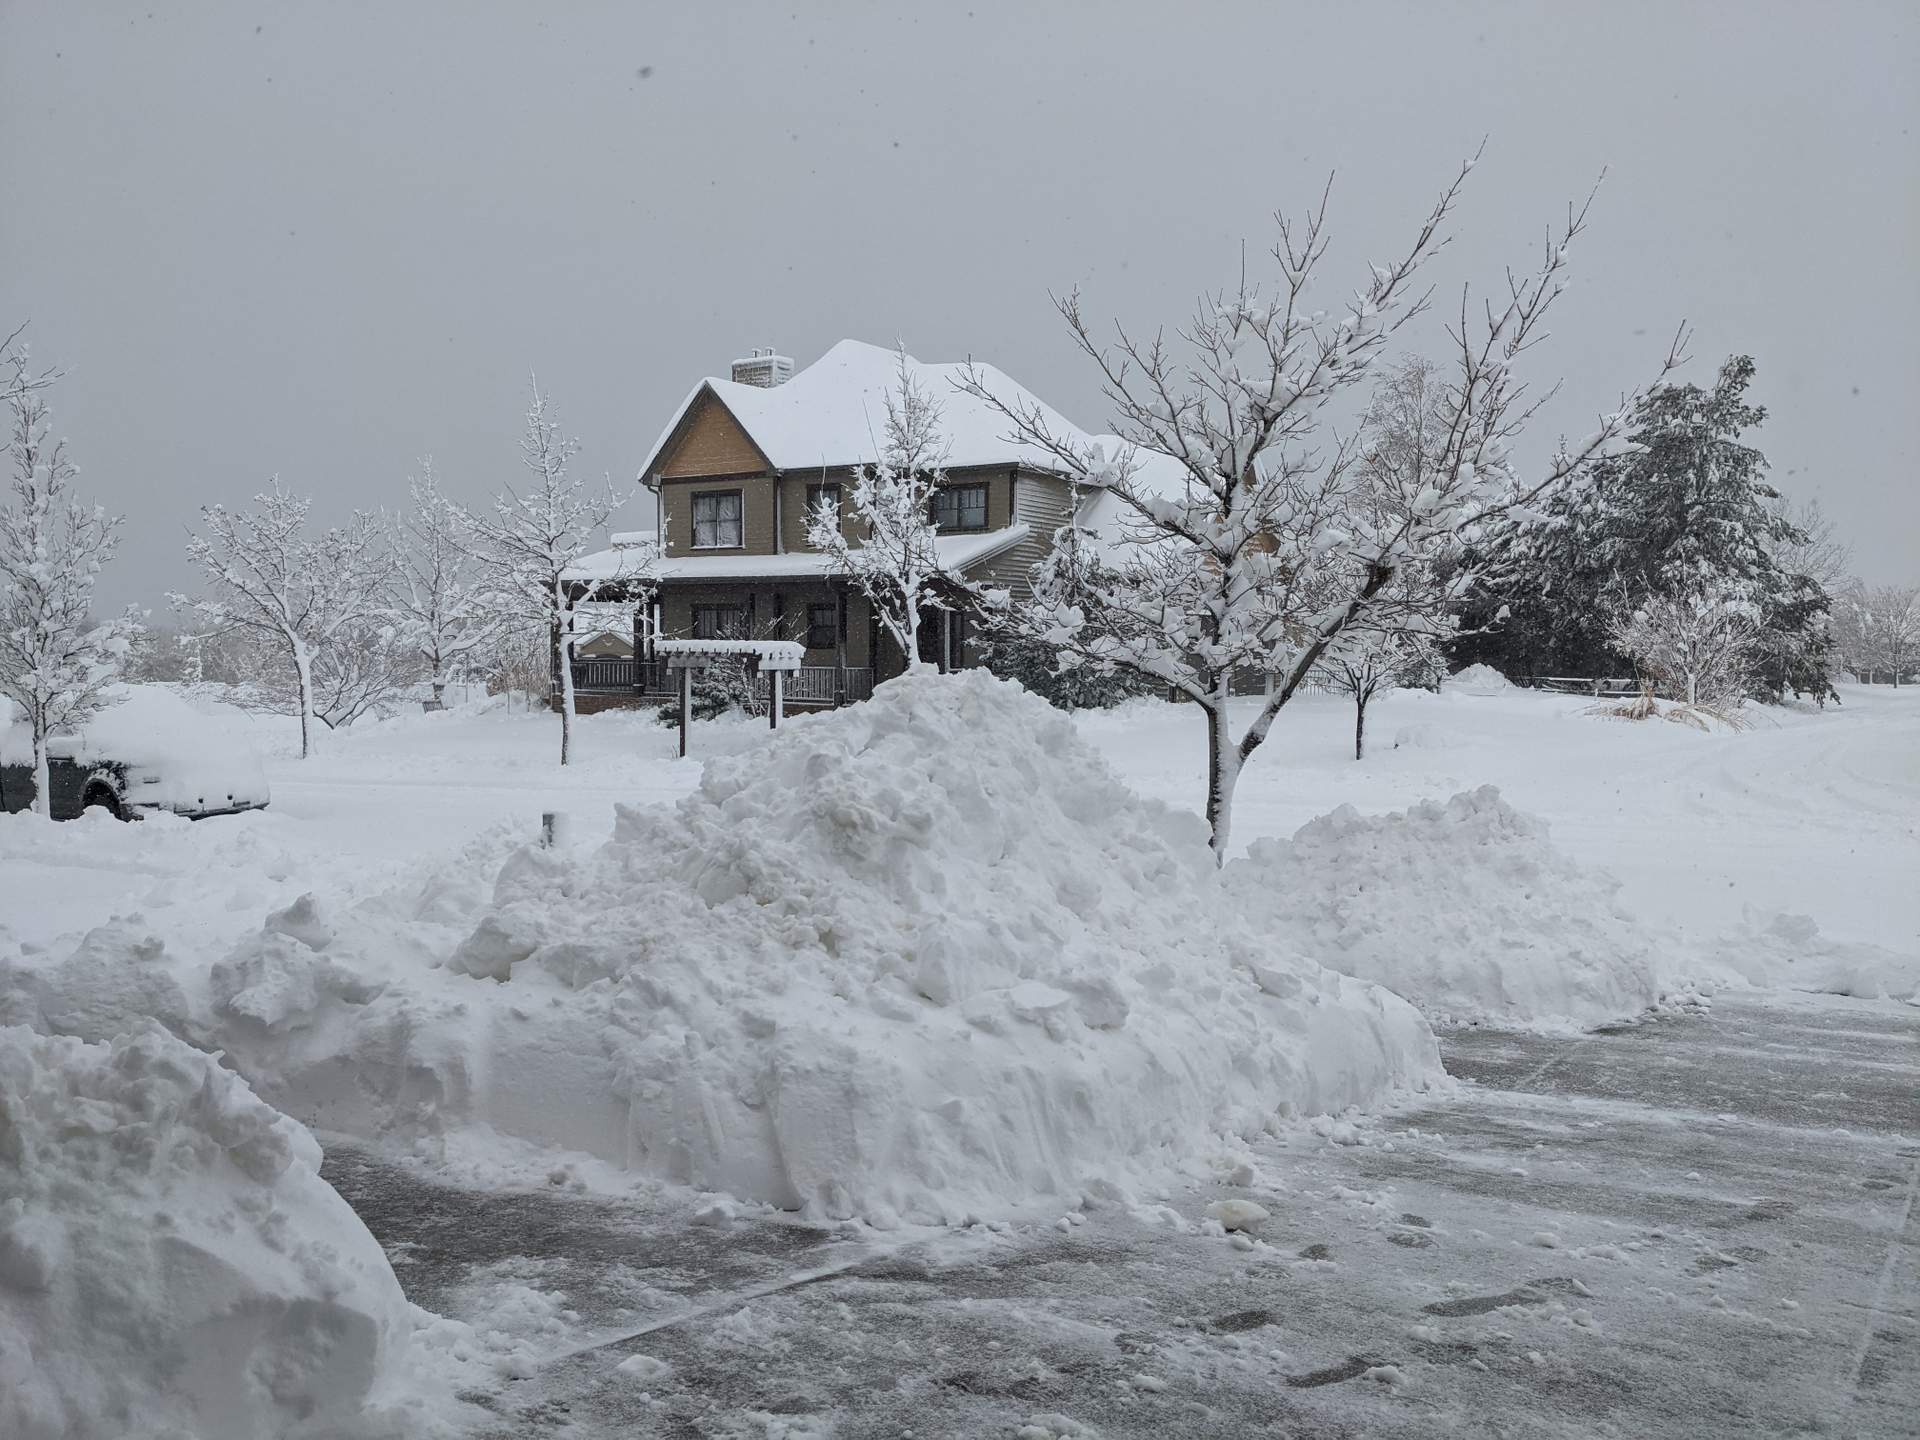 4-foot tall snowpile next to driveway with big house in north Fort Collins